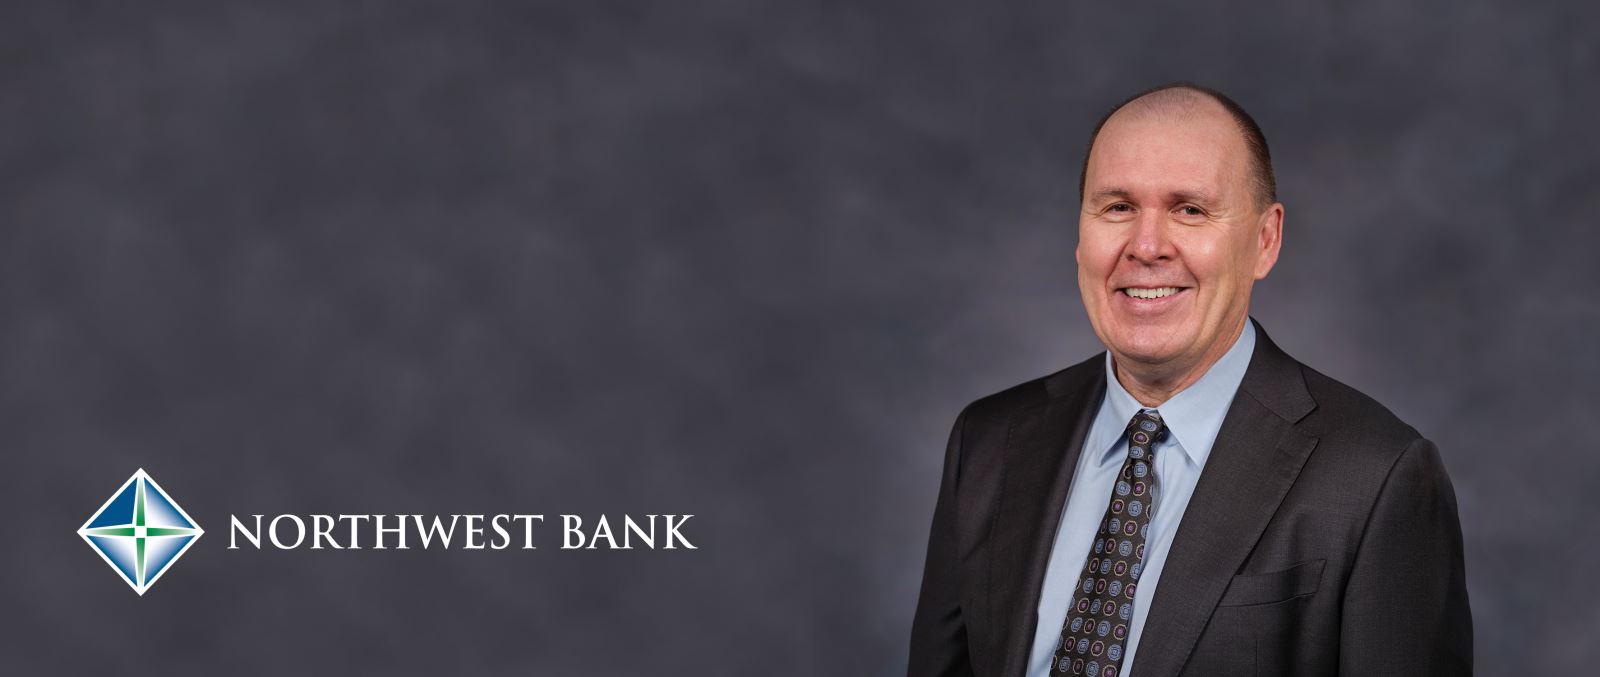 Northwest Bank logo and photo of Kent Roos